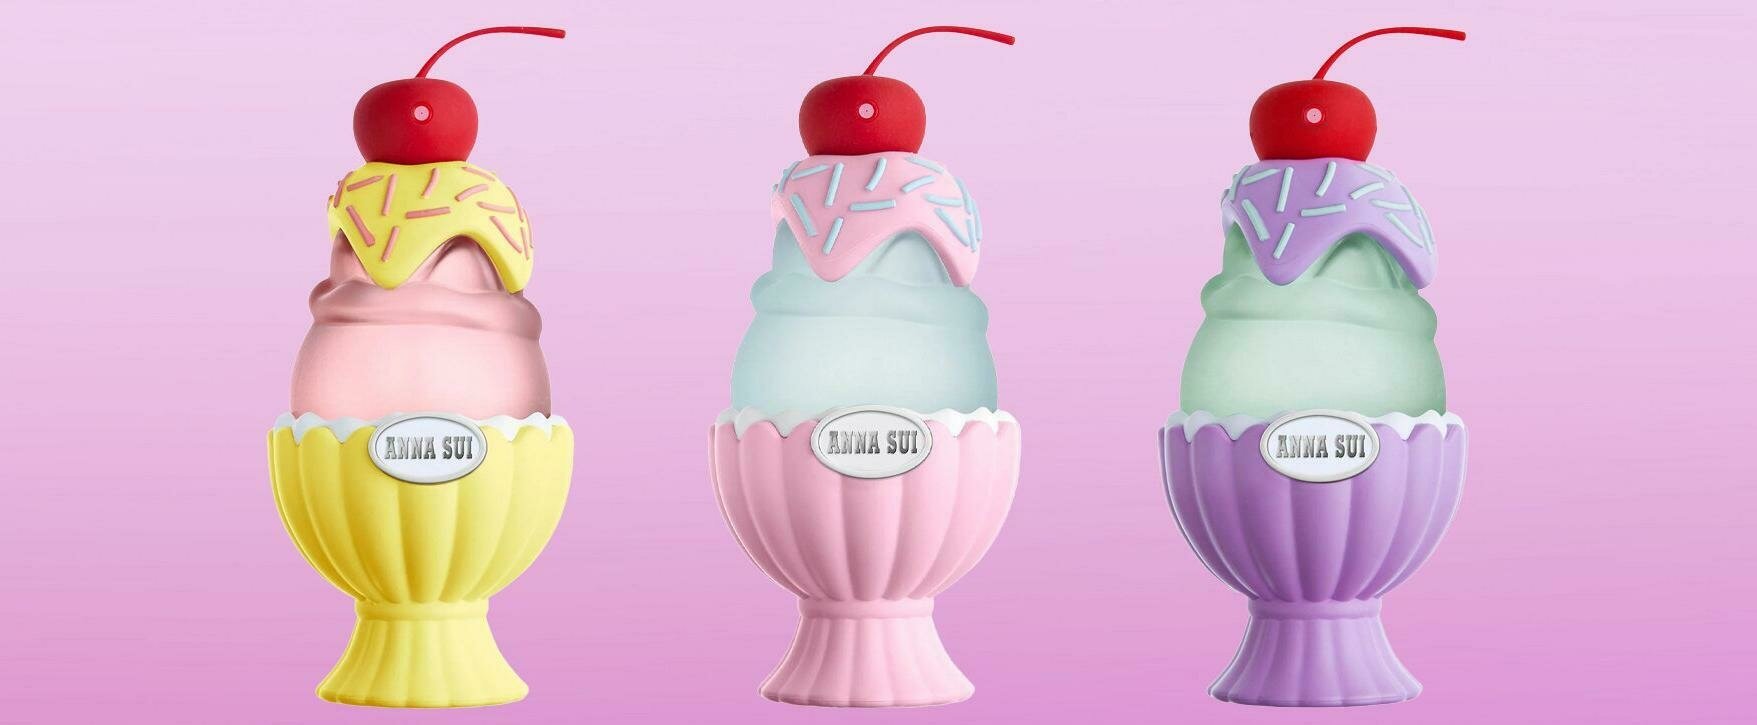 A Playful Ode to Ice Cream: The New "Sundae" Fragrance Range by Anna Sui